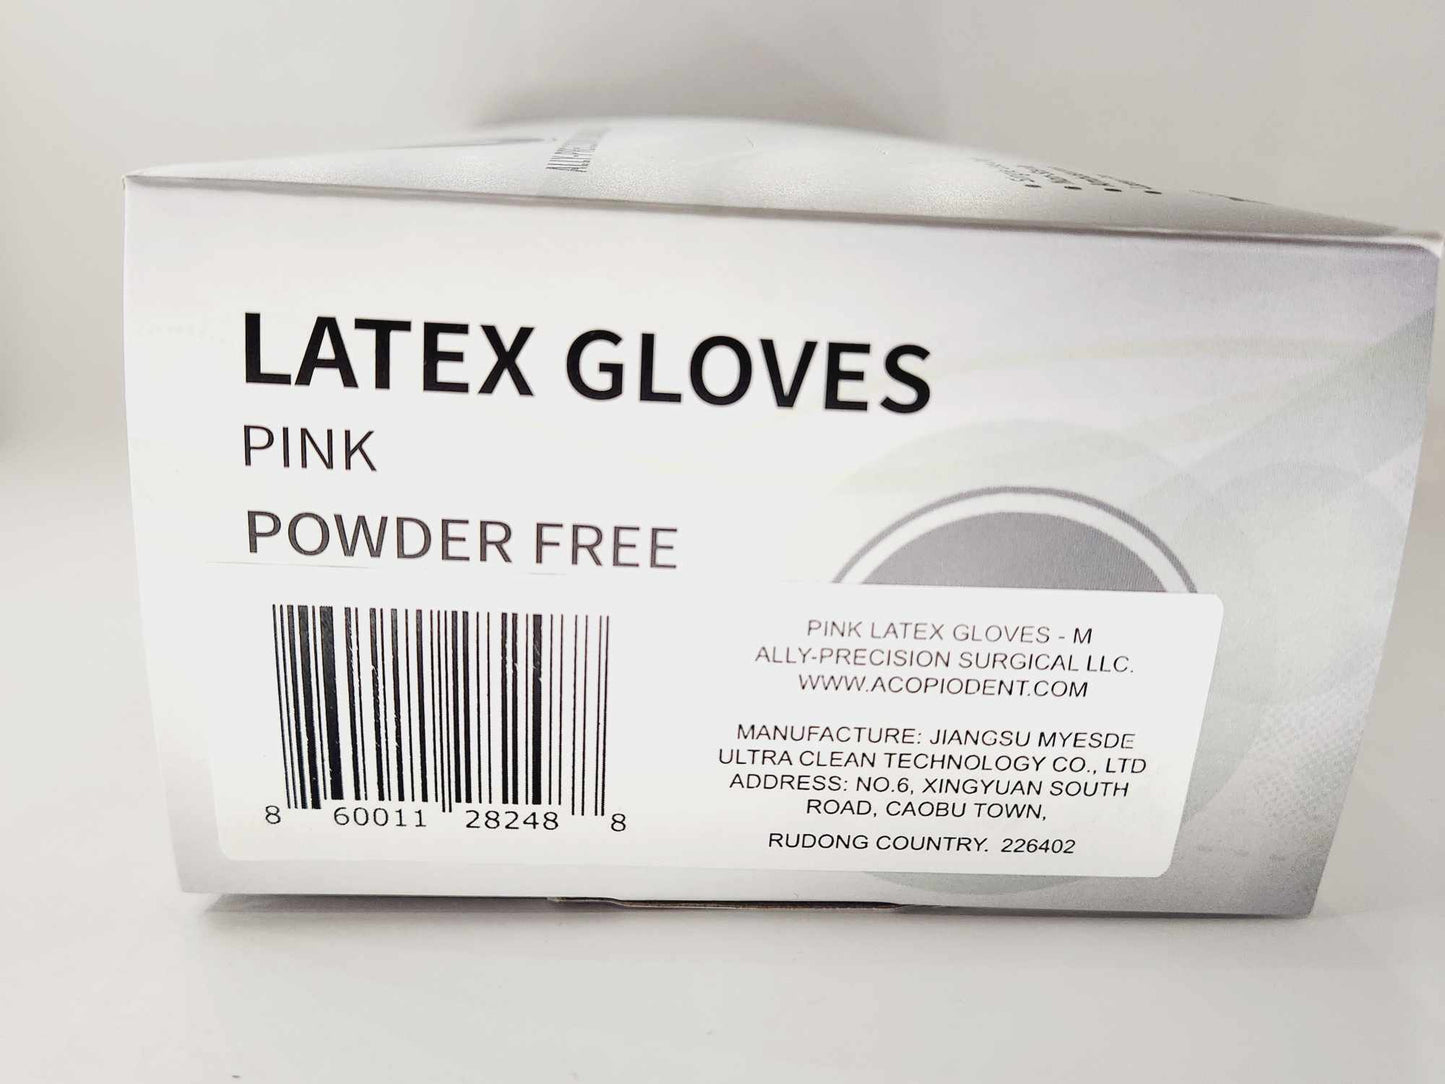 Pink Latex Gloves Ally-Precision Surgical